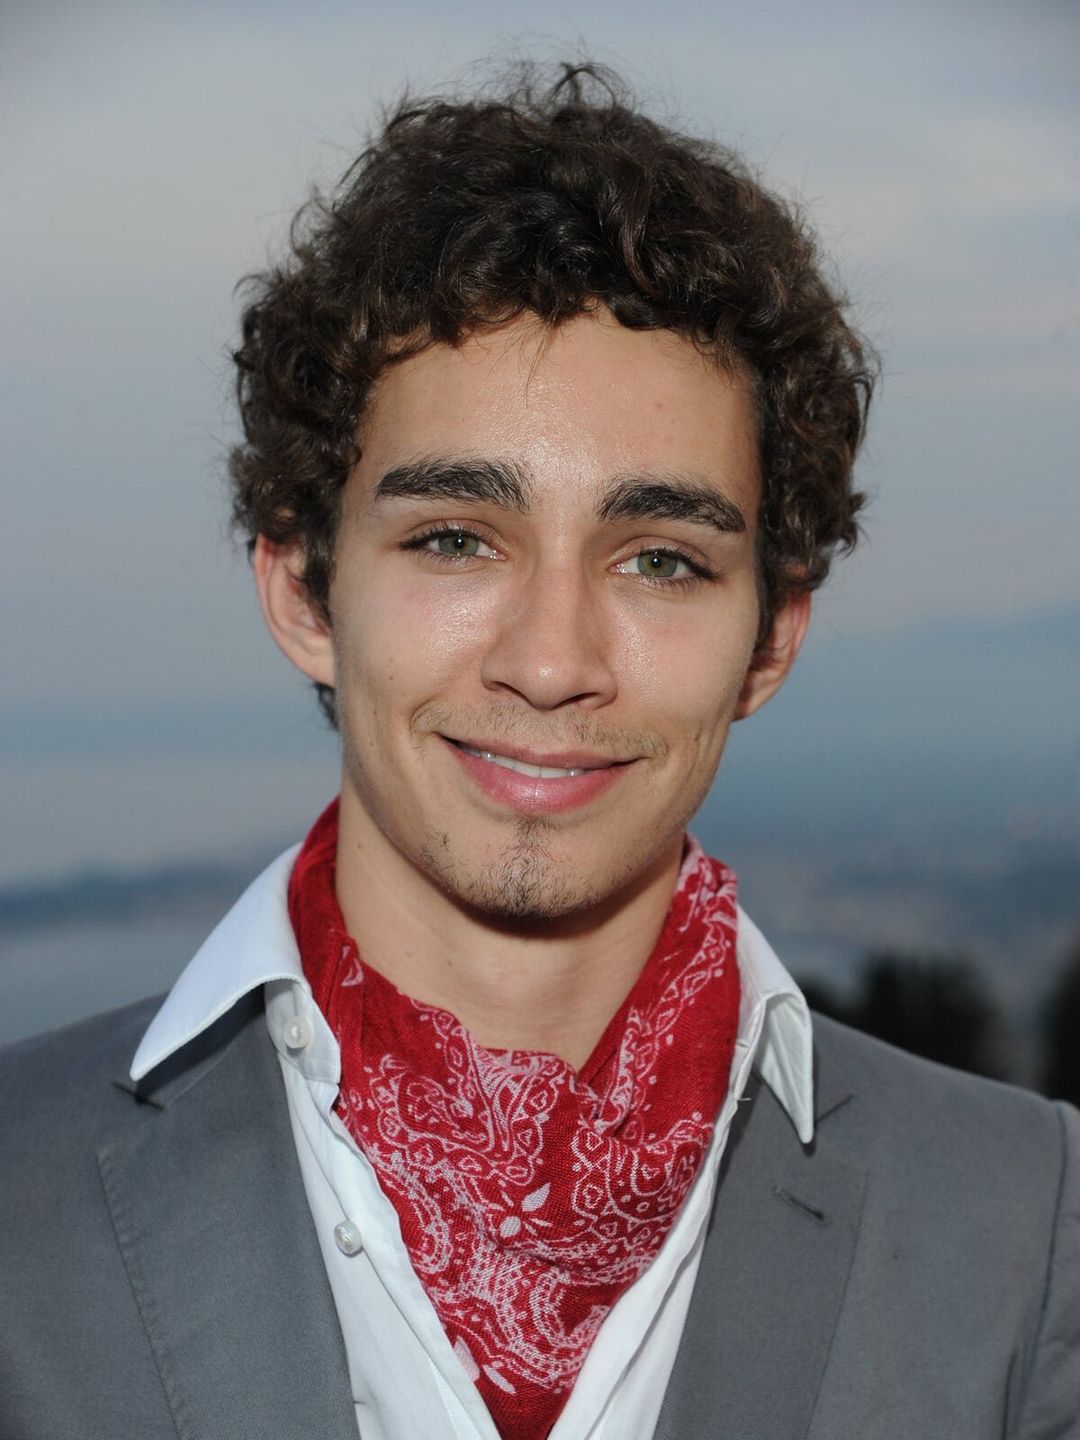 Robert Sheehan who are his parents